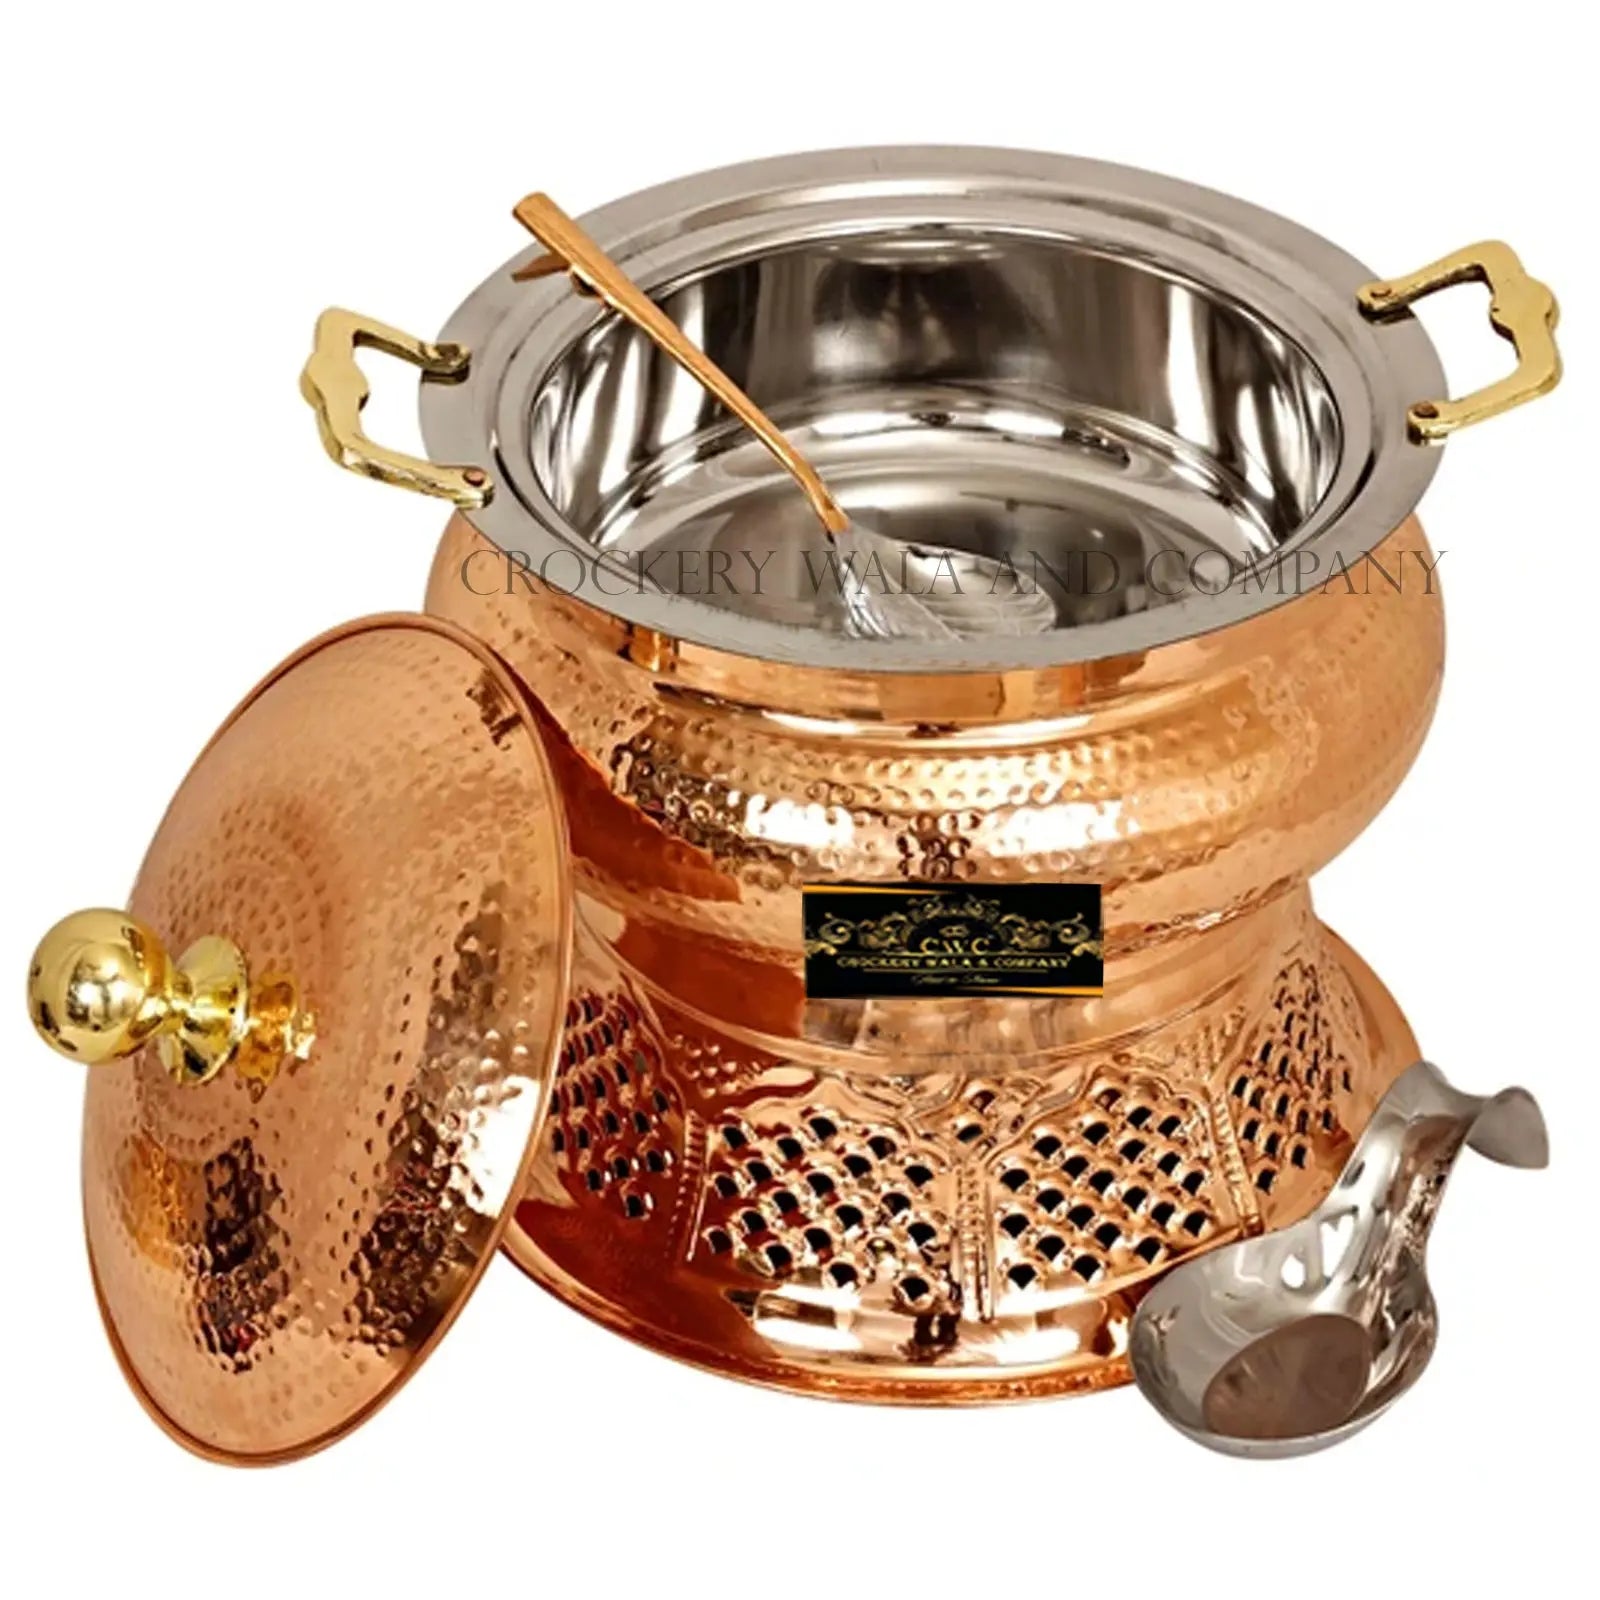 Crockery Wala And Company Copper Steel Chaffing Dish Hammered Design Chaffing Dish With Stand And Spoon 6 Liters - CROCKERY WALA AND COMPANY 